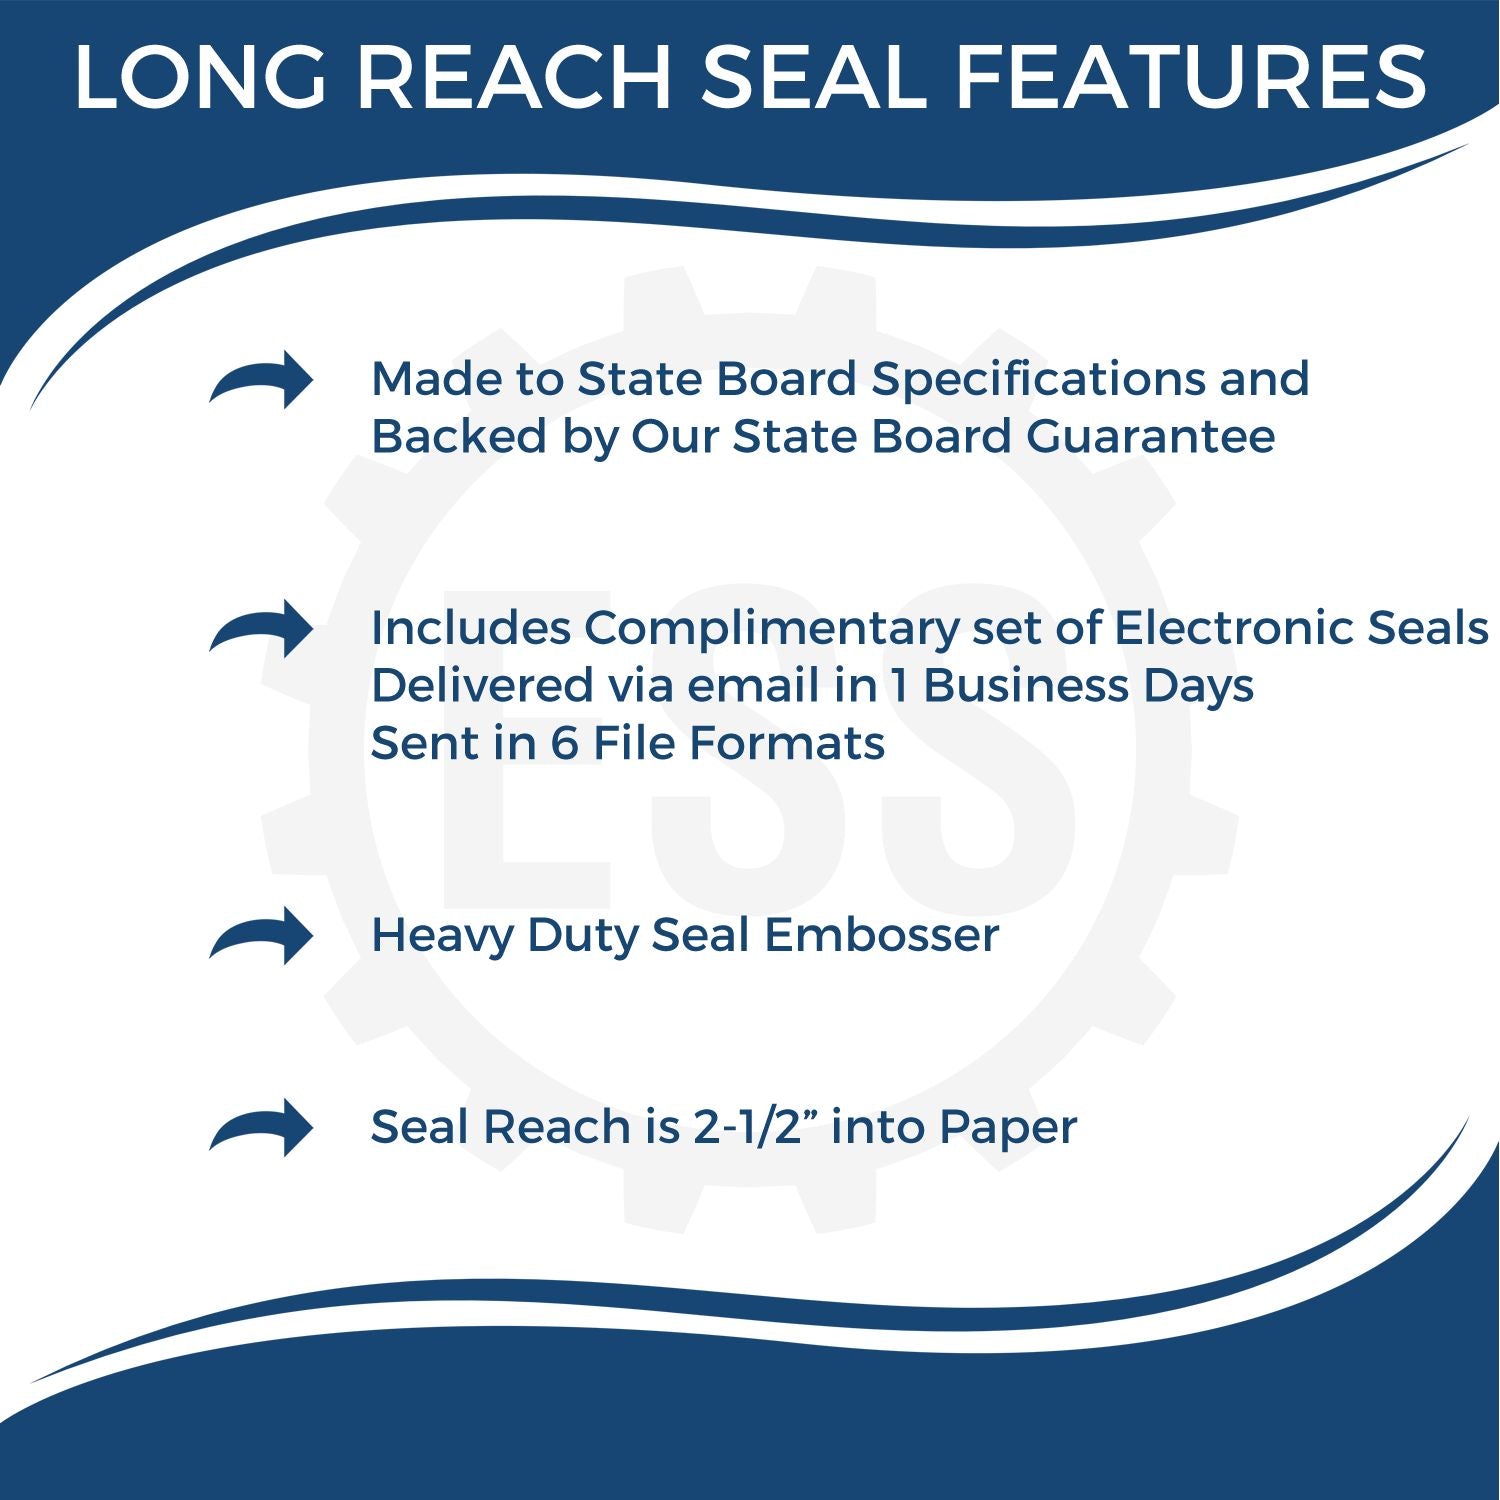 The main image for the Long Reach Kansas PE Seal depicting a sample of the imprint and electronic files